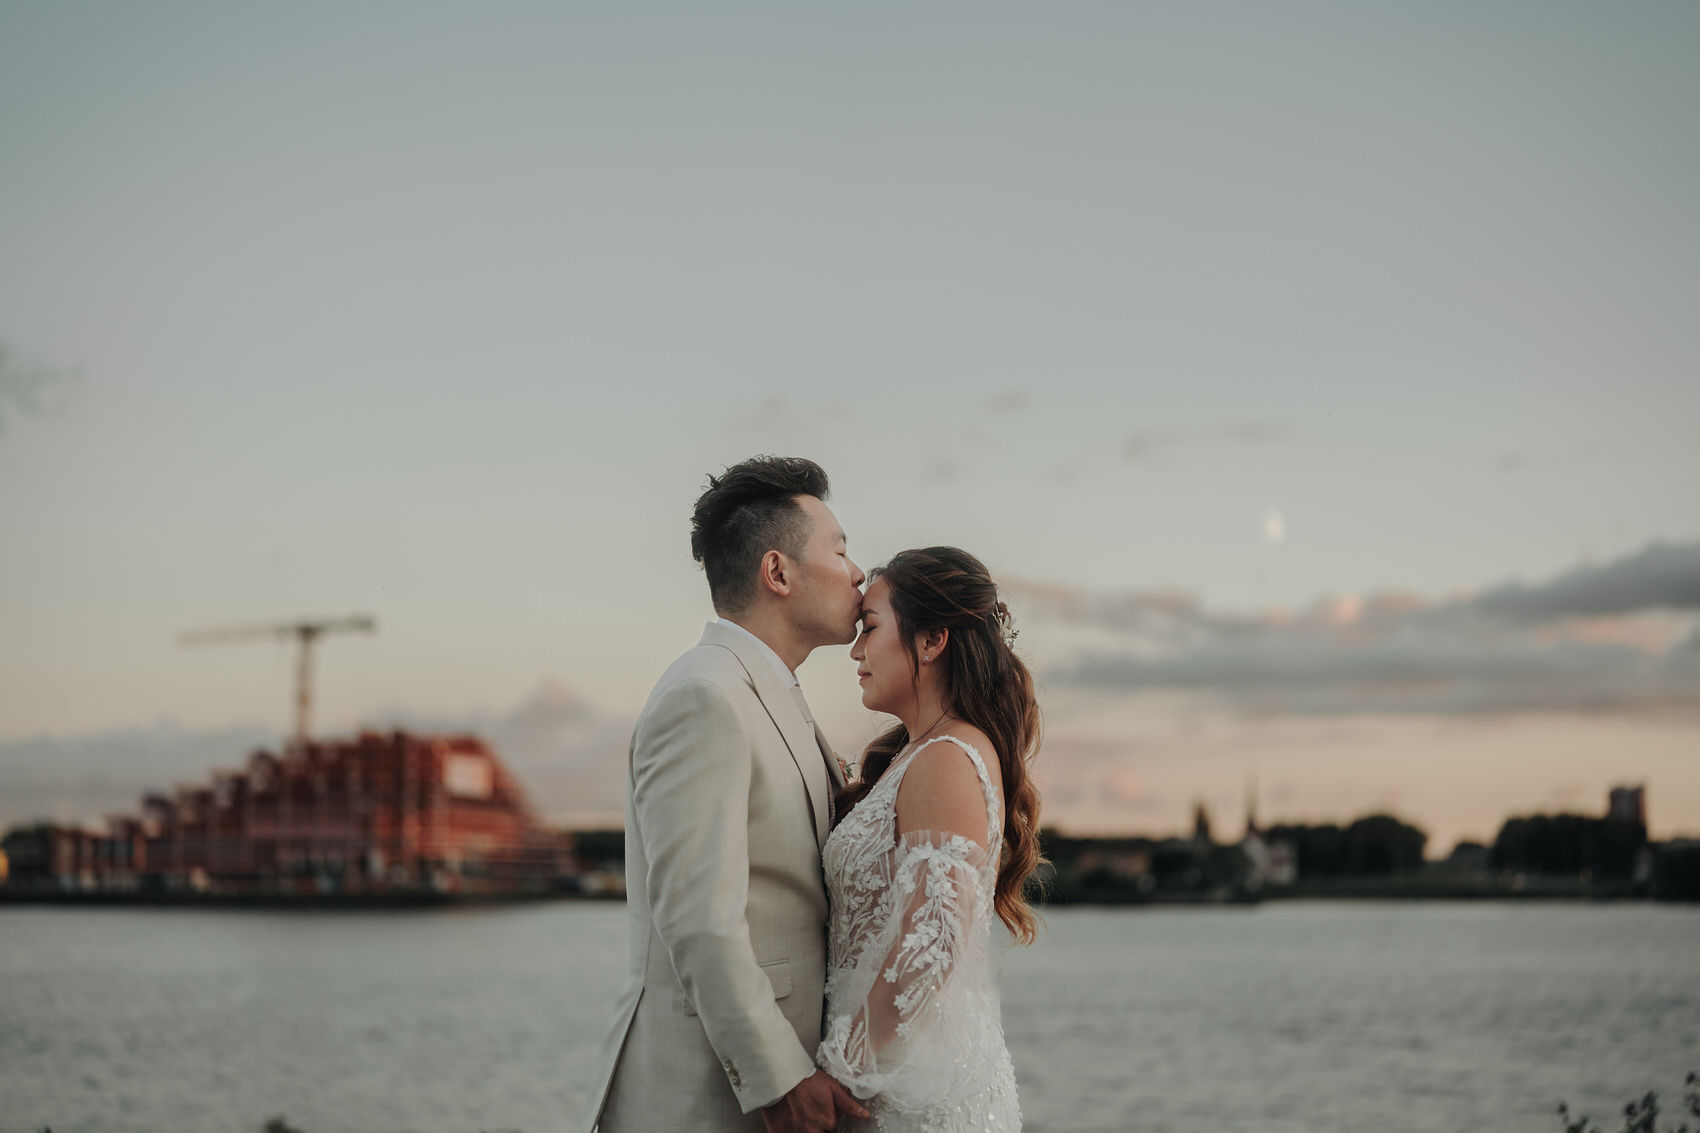 A Destination Wedding Photography in Rotterdam | Jukki & Robin Bride and groom posing for outdoor portraits by the riverside near Zalmhuis